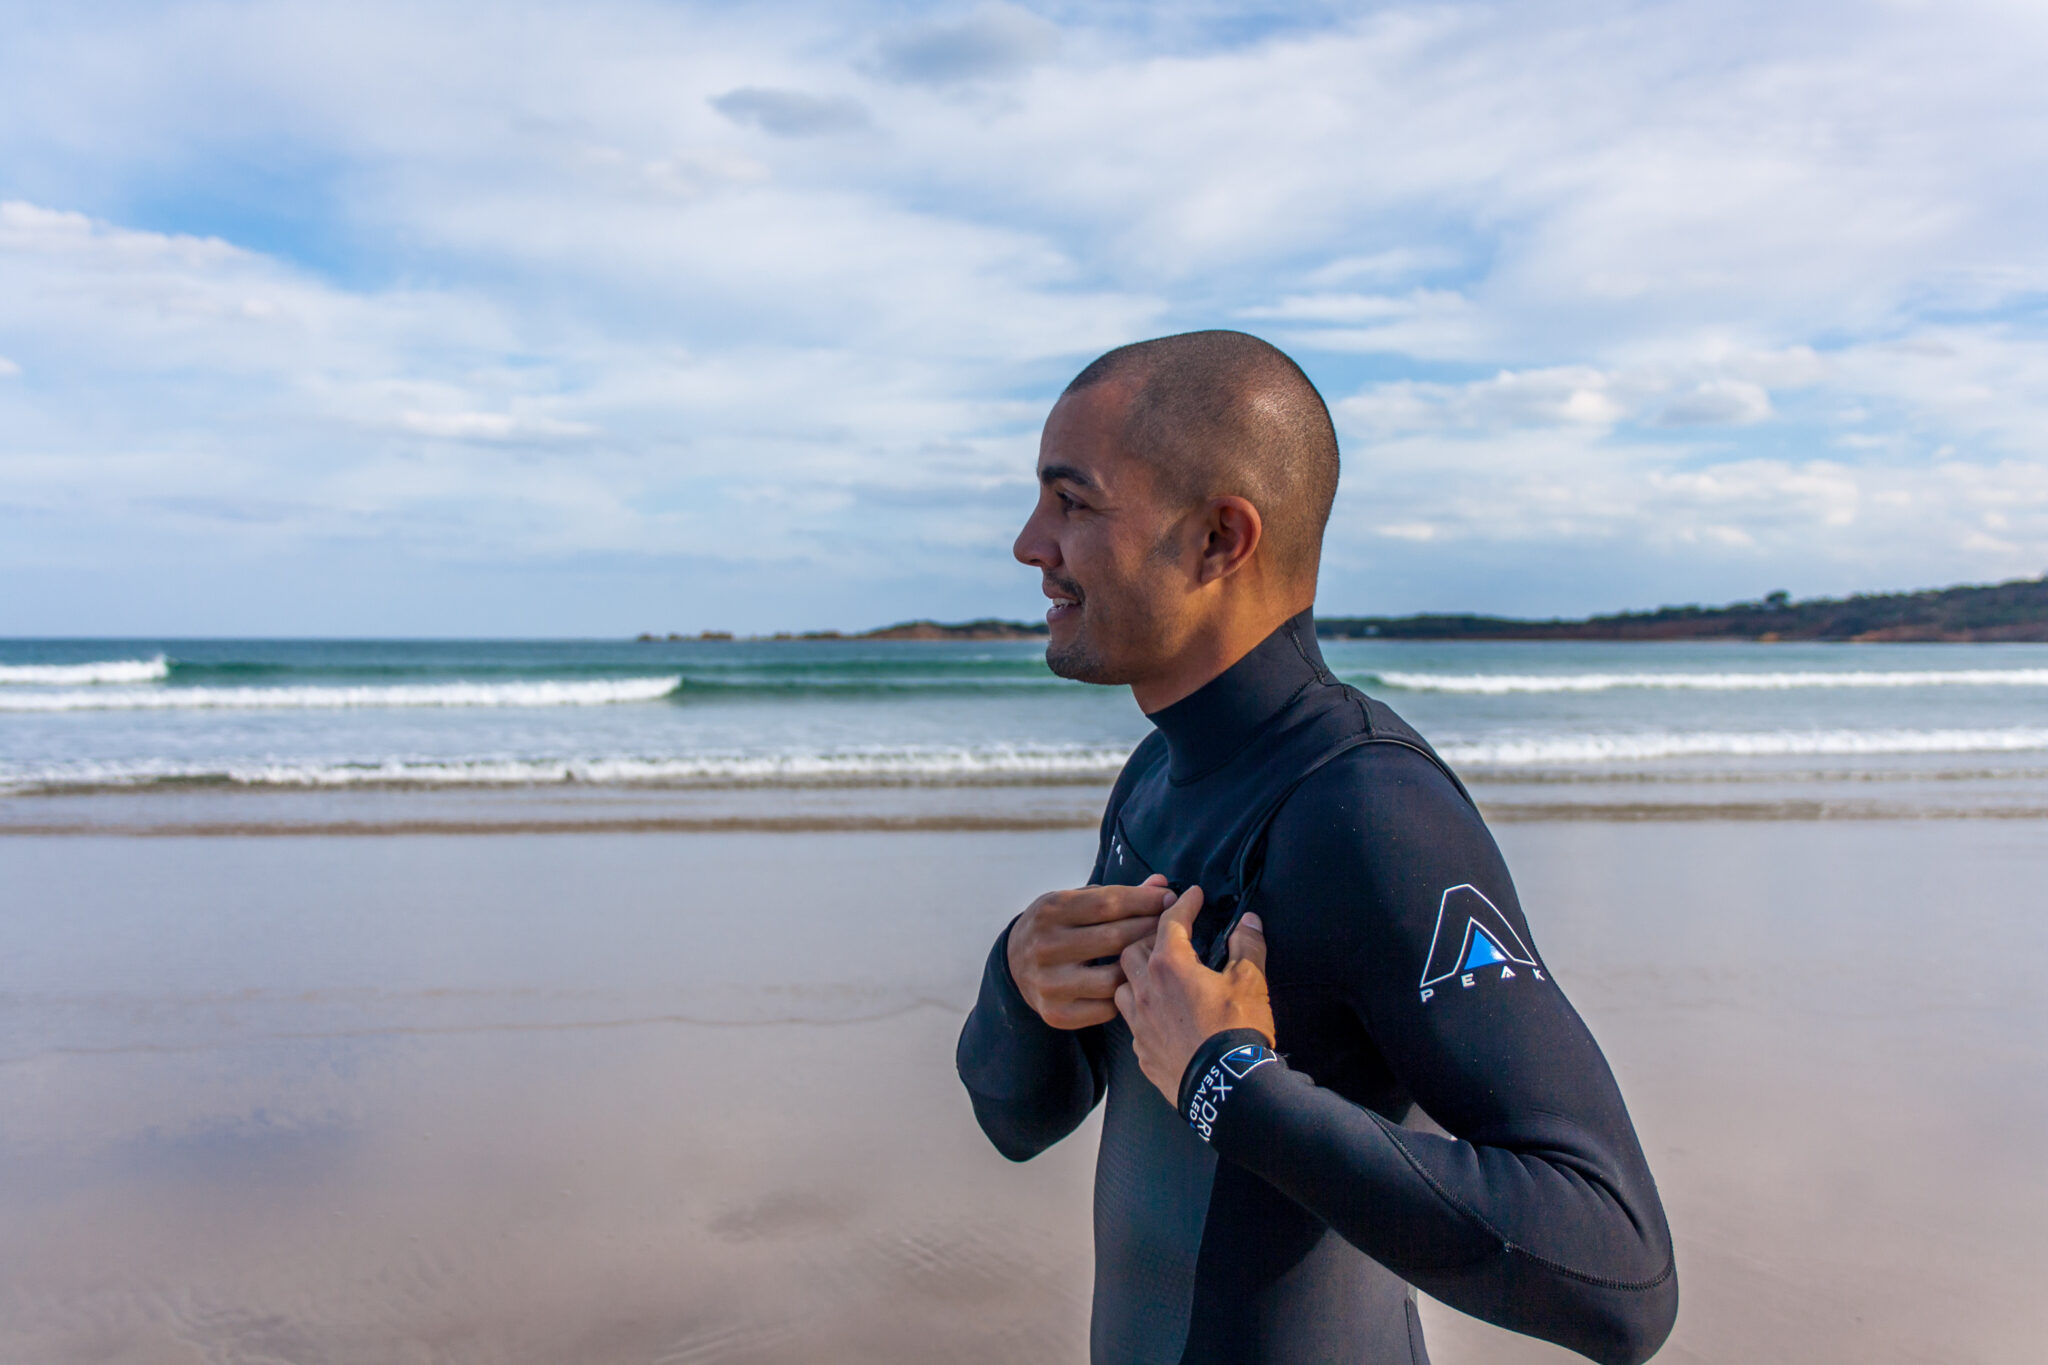 Man with wetsuit on for an ocean swim